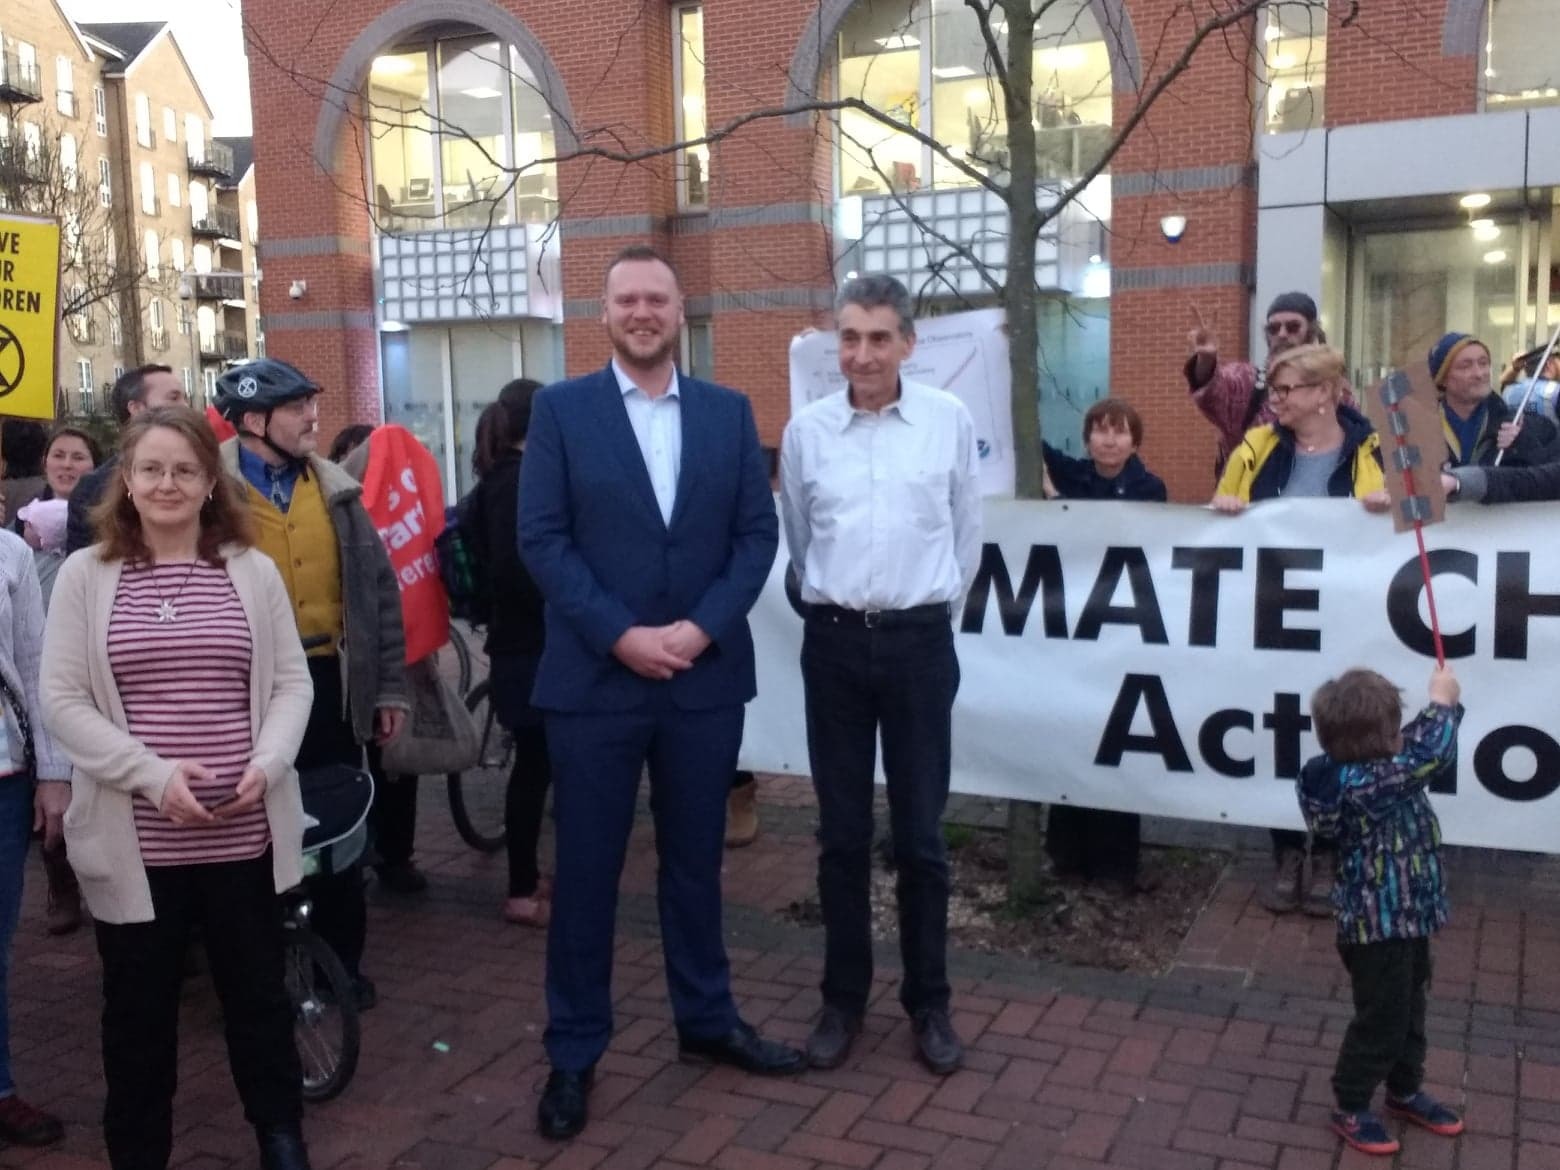 Climate emergency demonstration with councillors Tony Page and Jason Brock and Extinction Rebellion